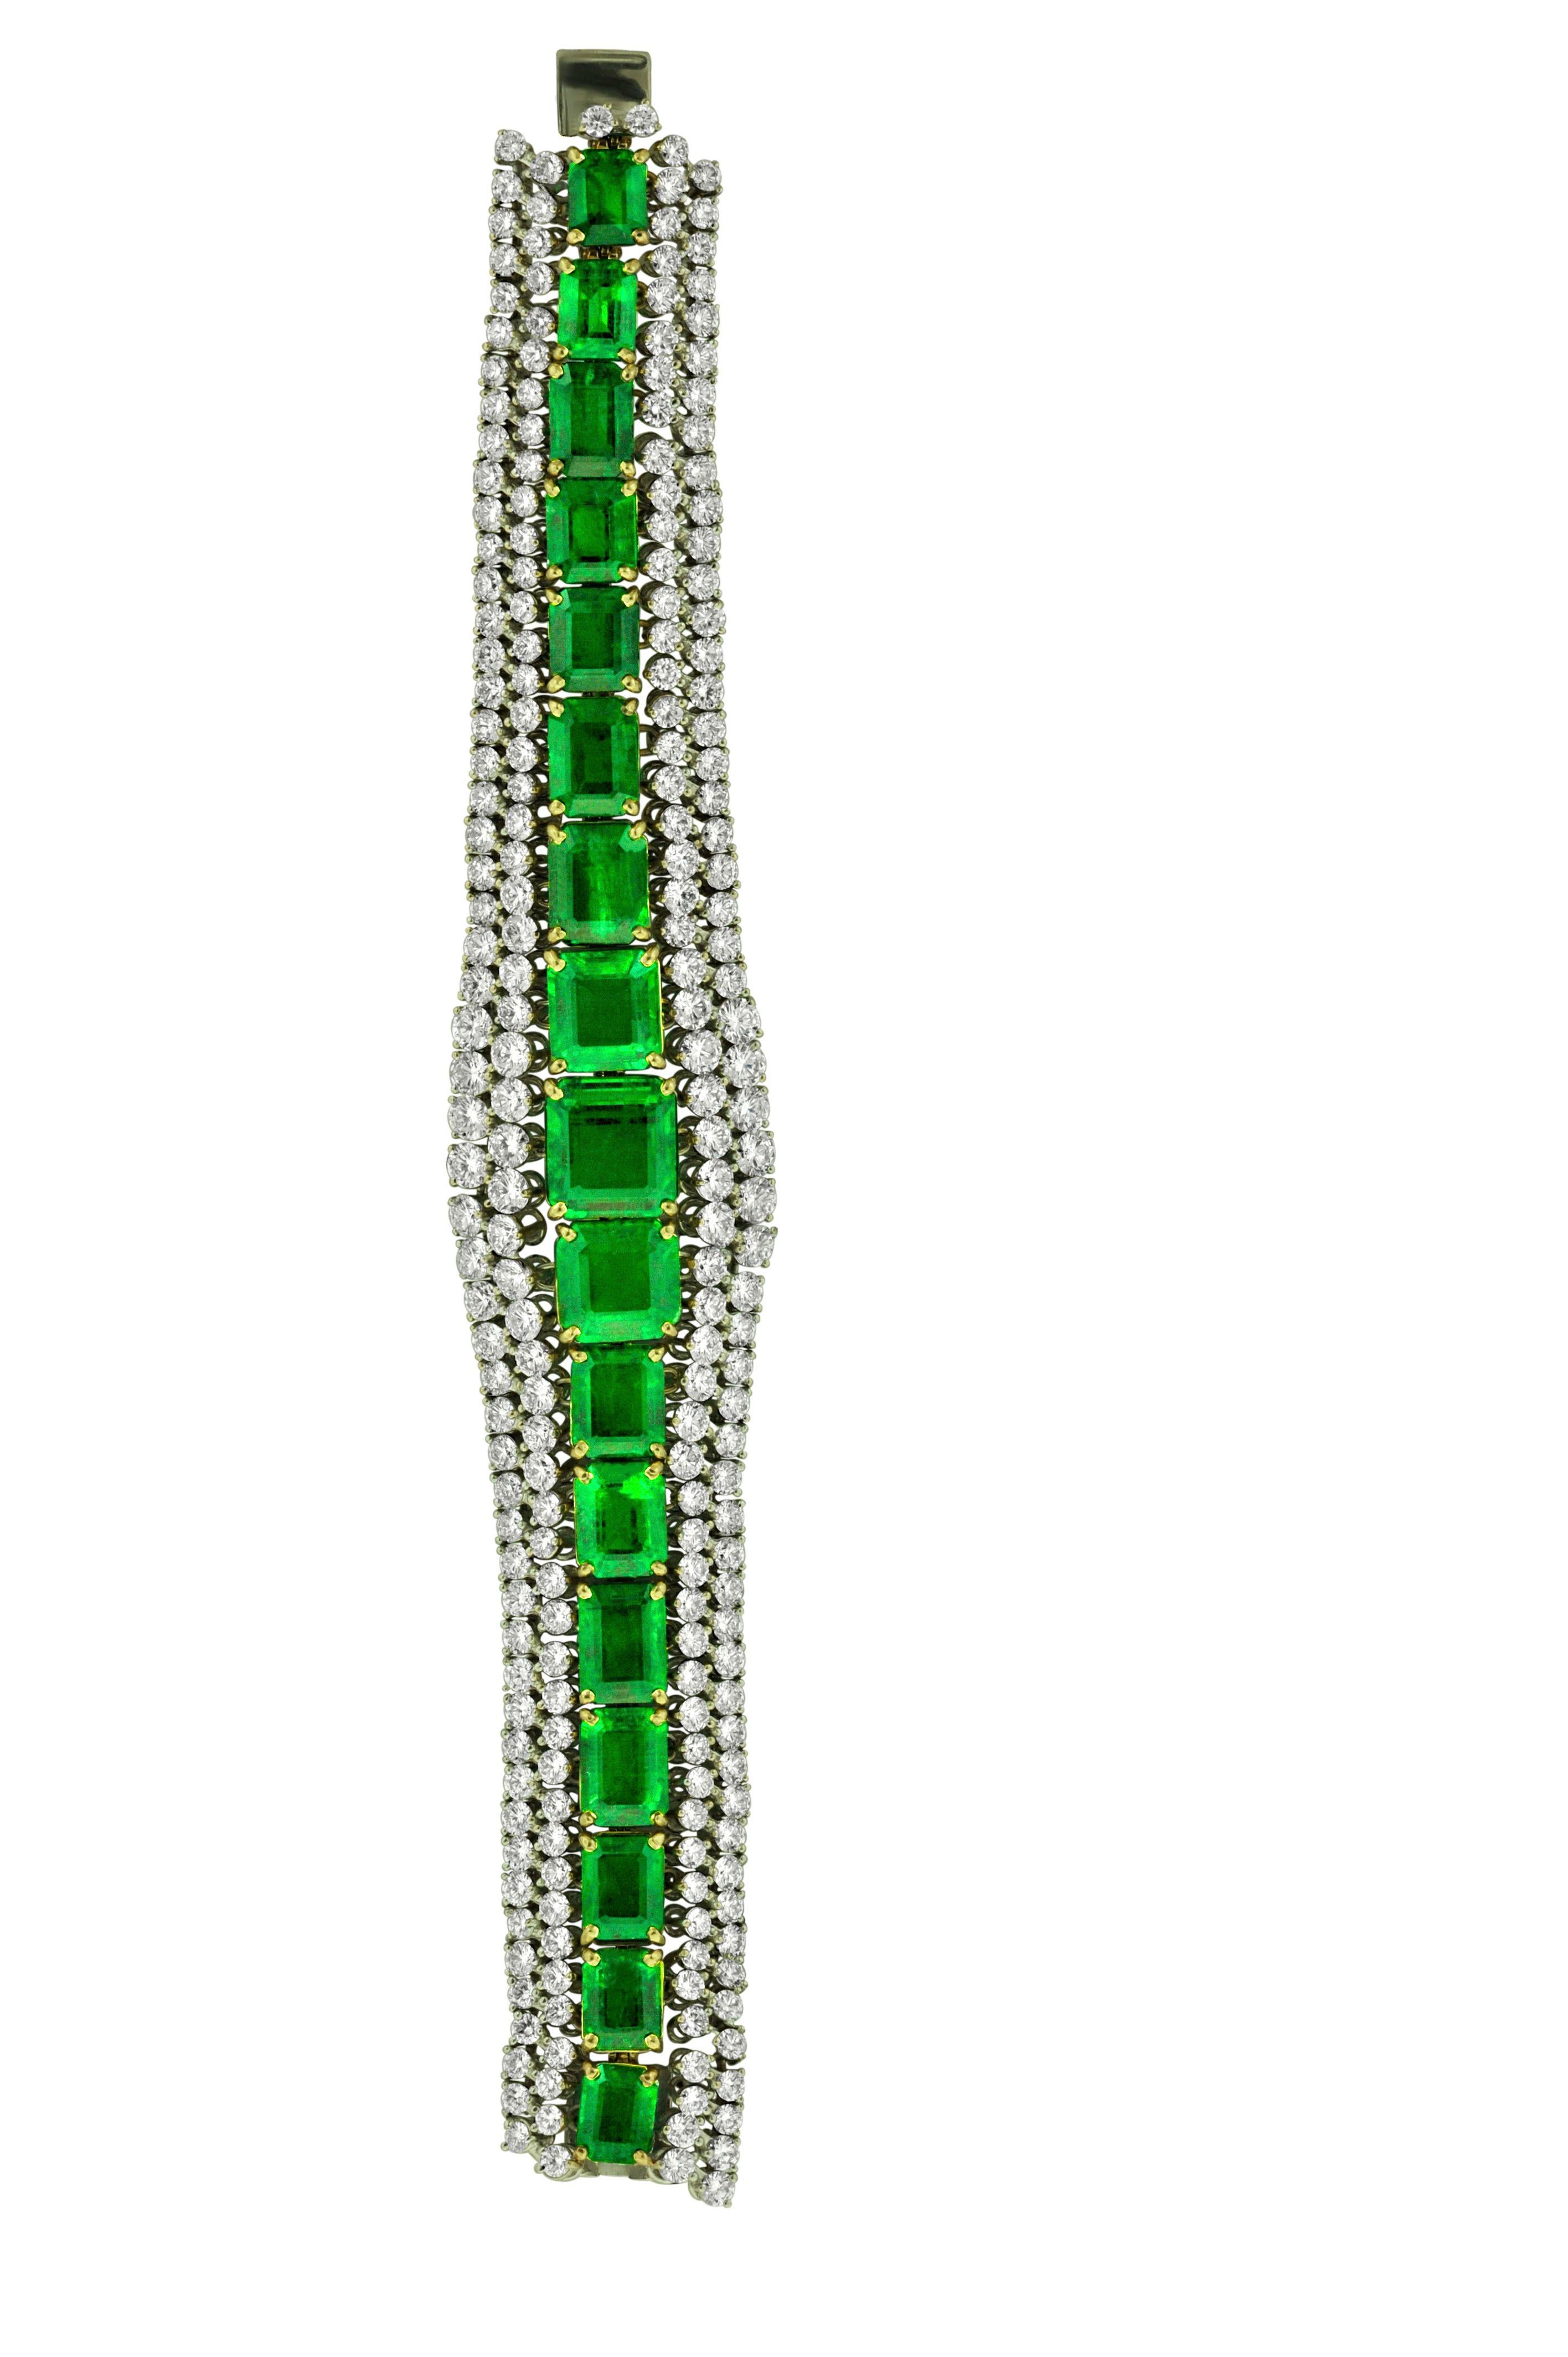 Openwork platinum and 18 kt yellow gold green emerald and diamond bracelet with a center row of 15 GIA certified and 2 uncertified square cut green emeralds totaling 69.29 cts with 2 rows of round diamonds above and below totaling 30.40 cts.